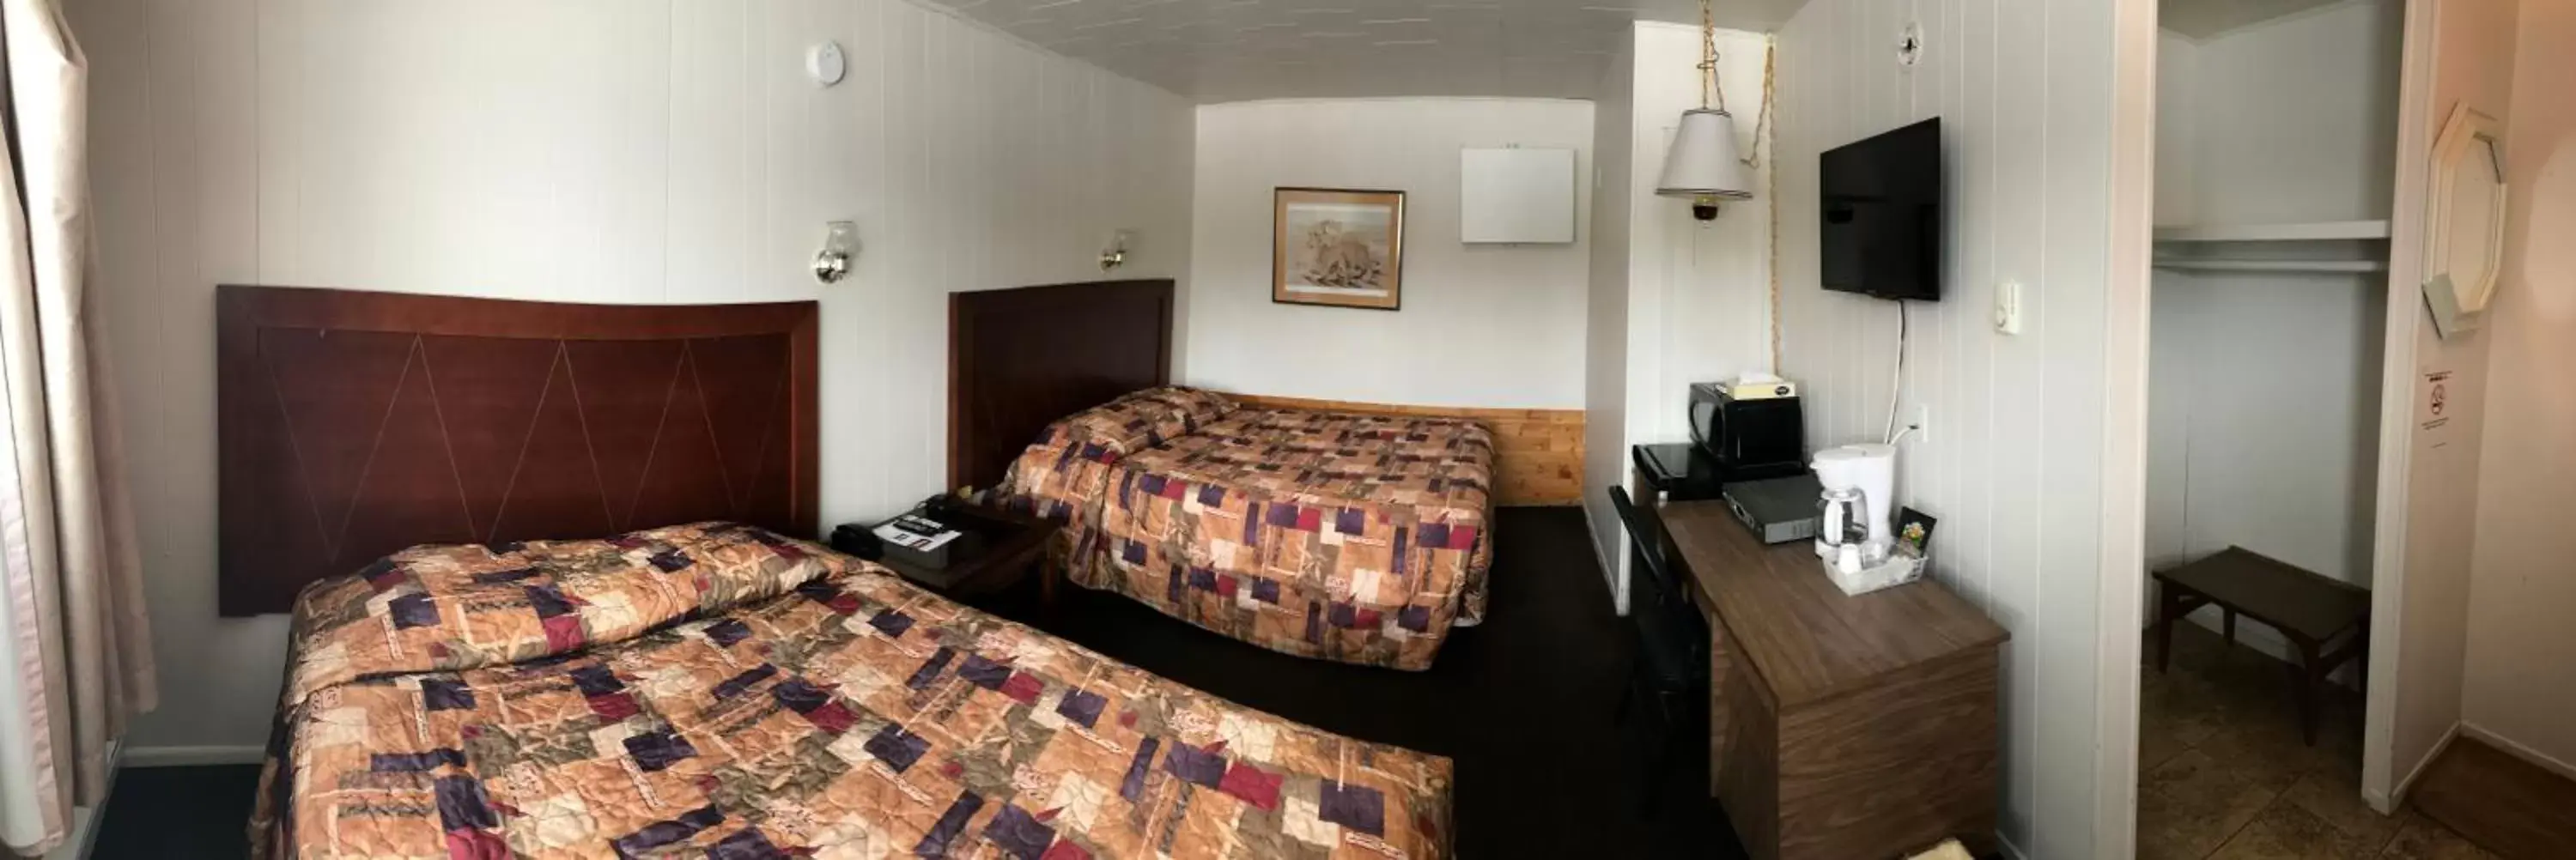 Bed in New Country Motel